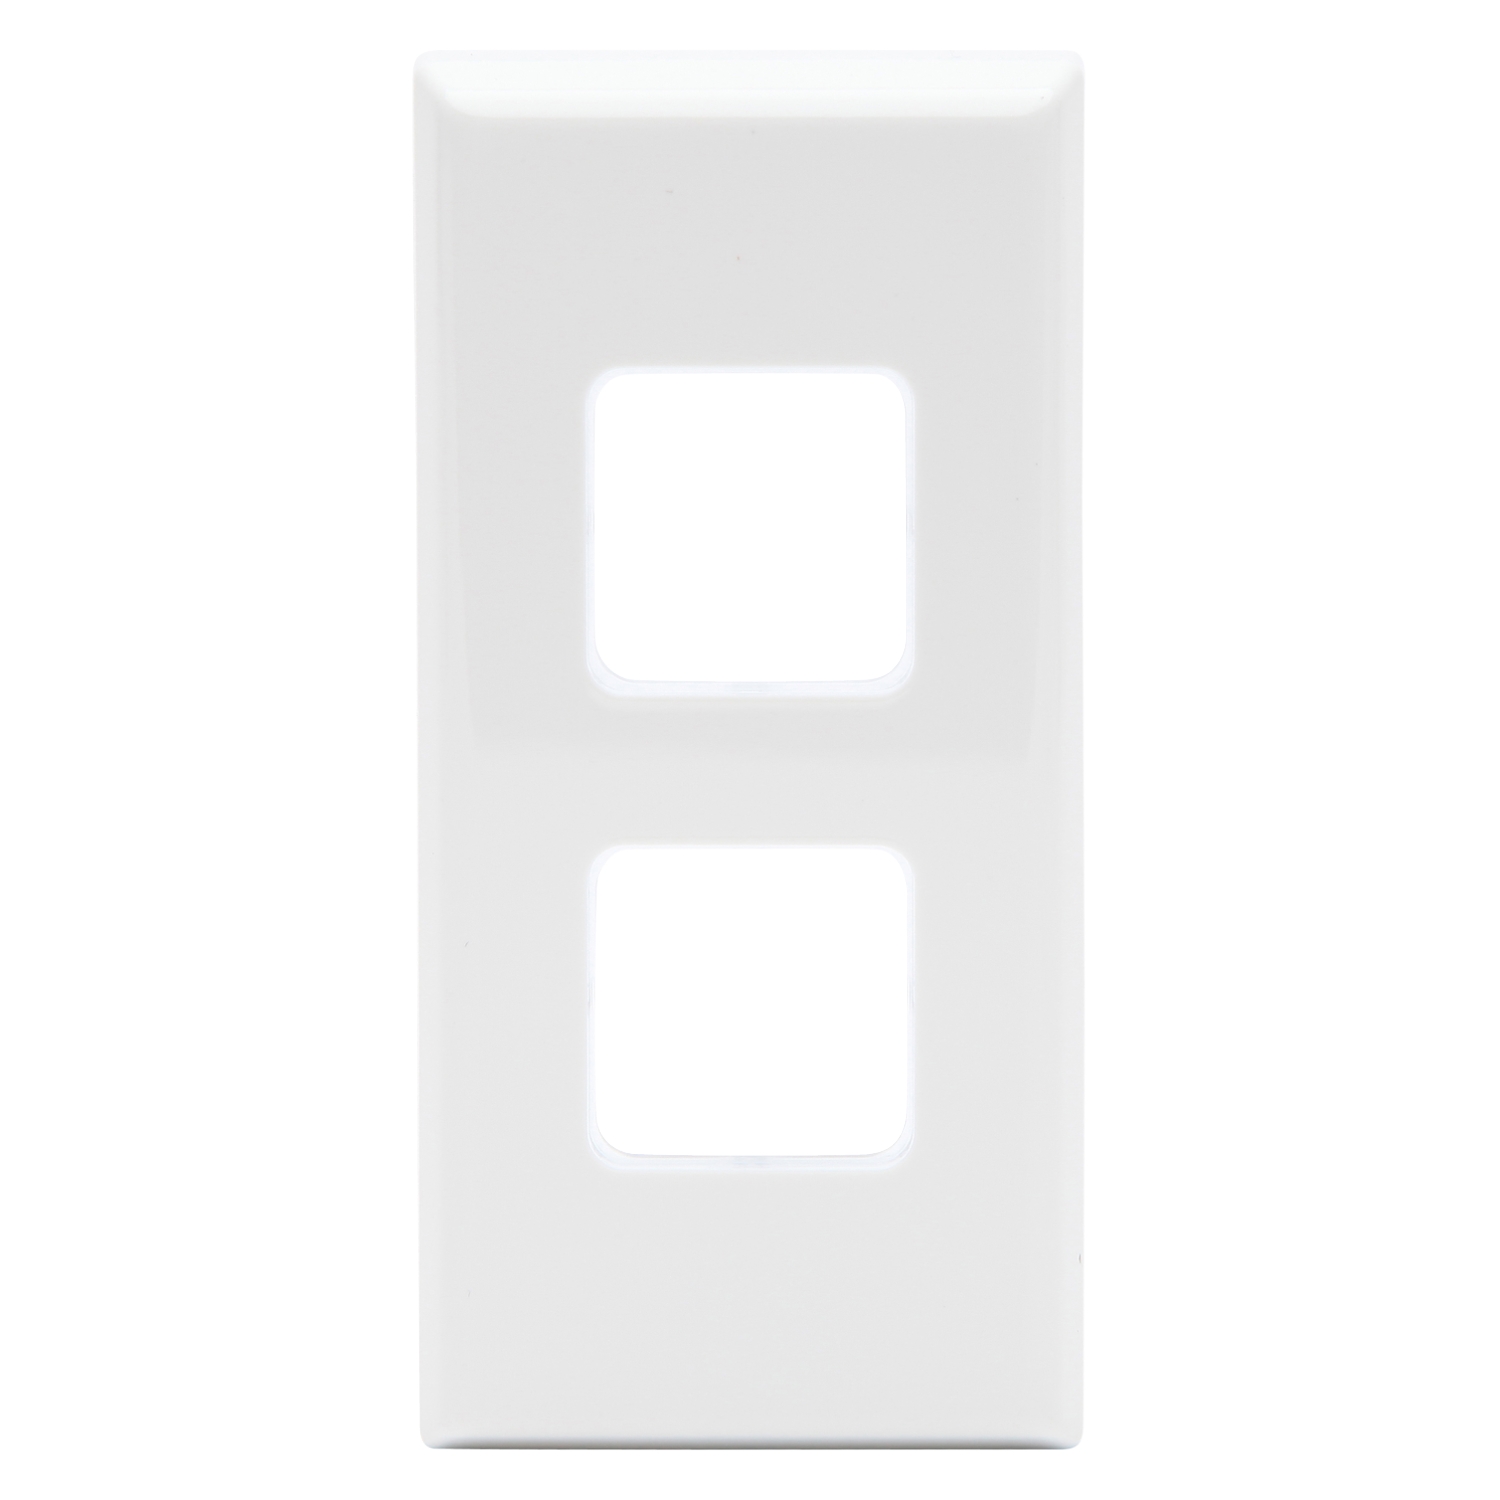 PDL 600 Series - Grid + Cover Plate Worktop Switch 2-Gang - White